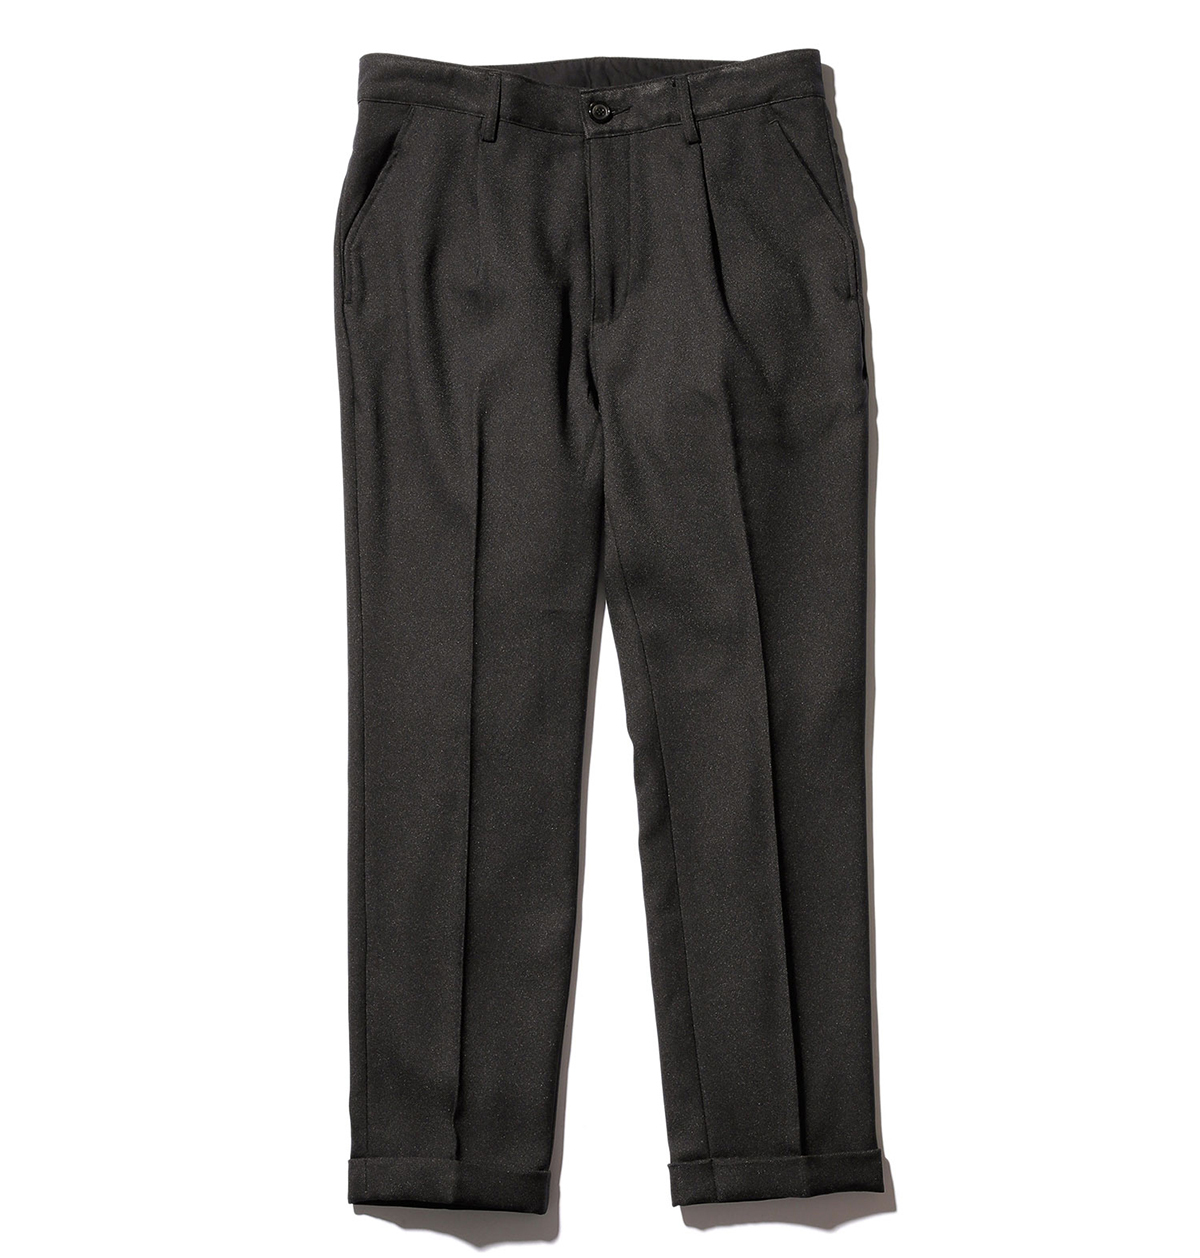 ONE PLEATS STA-PREST TAPERED PANTS 